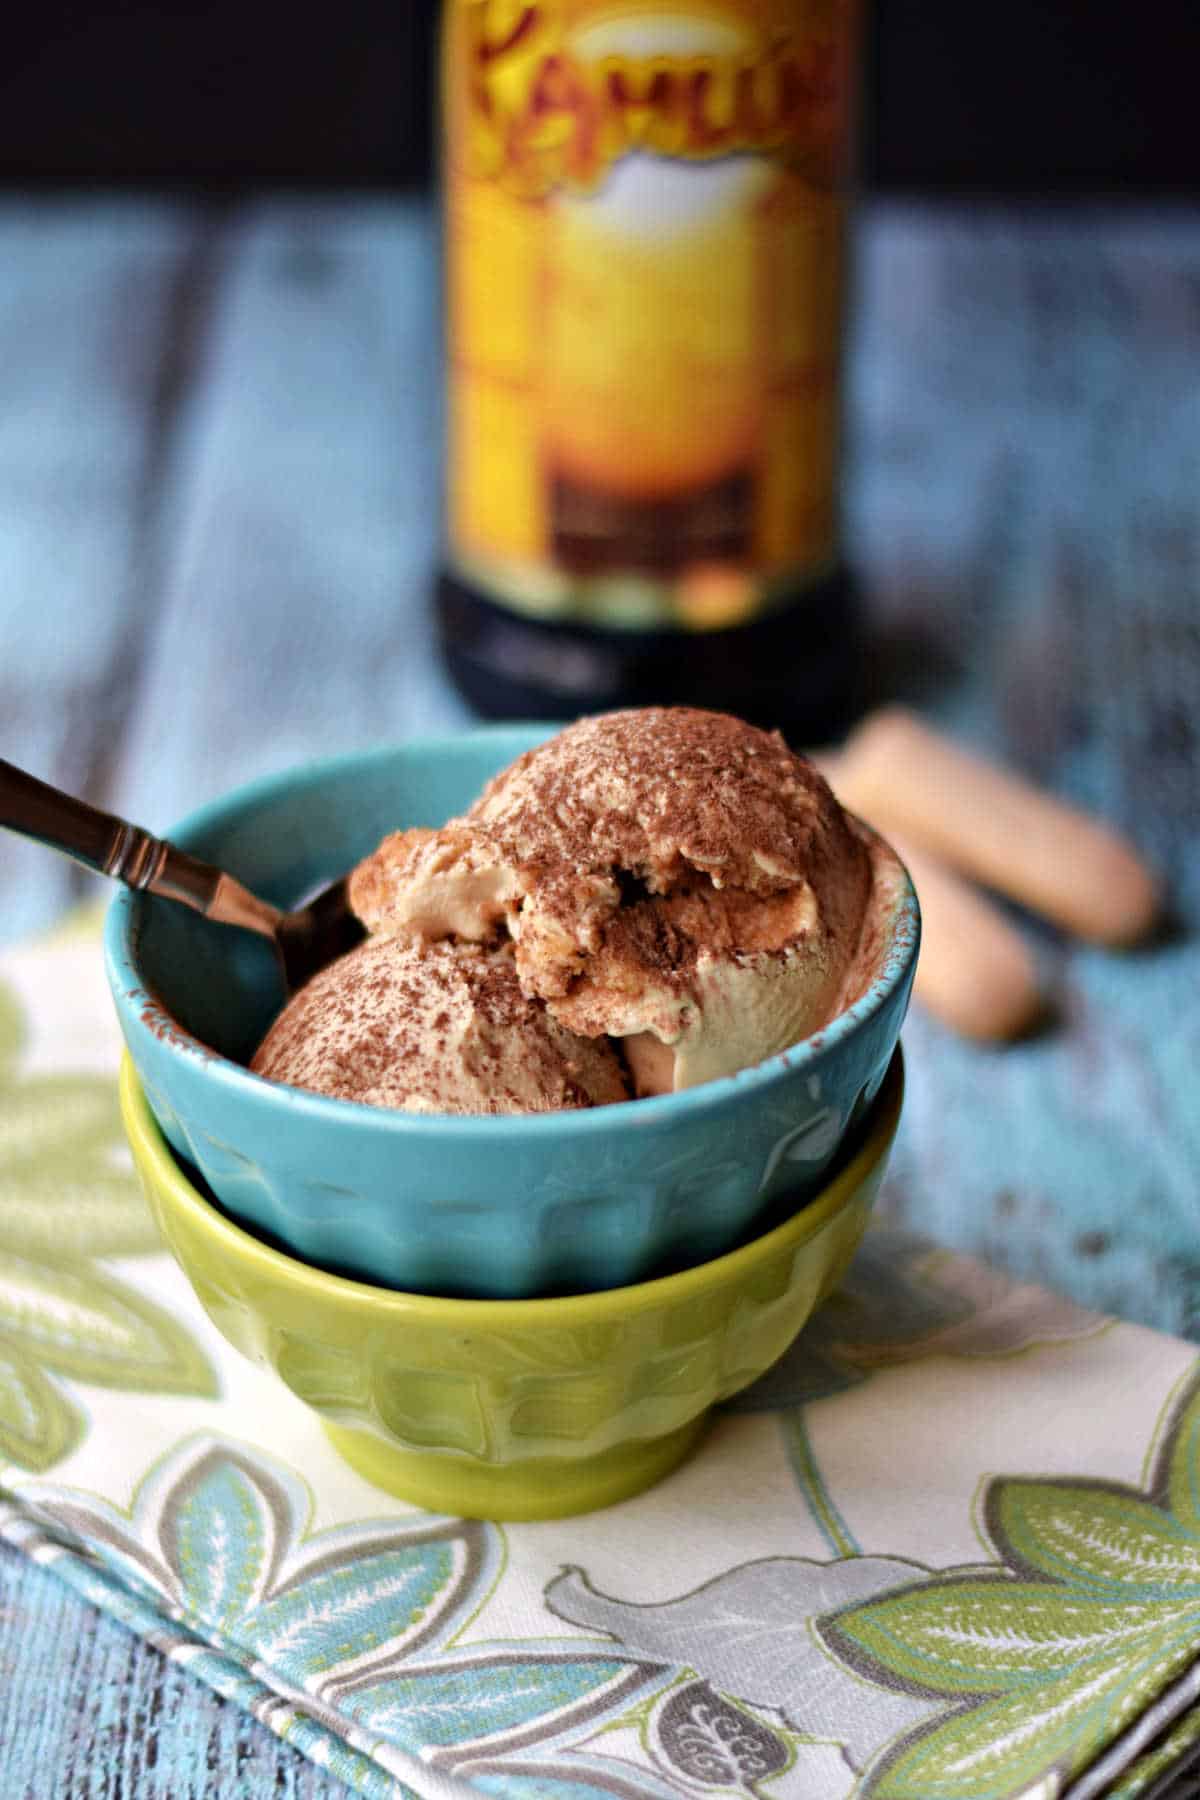 Tiramisu ice cream in stacked bowls in front of a bottle of Kahlua.